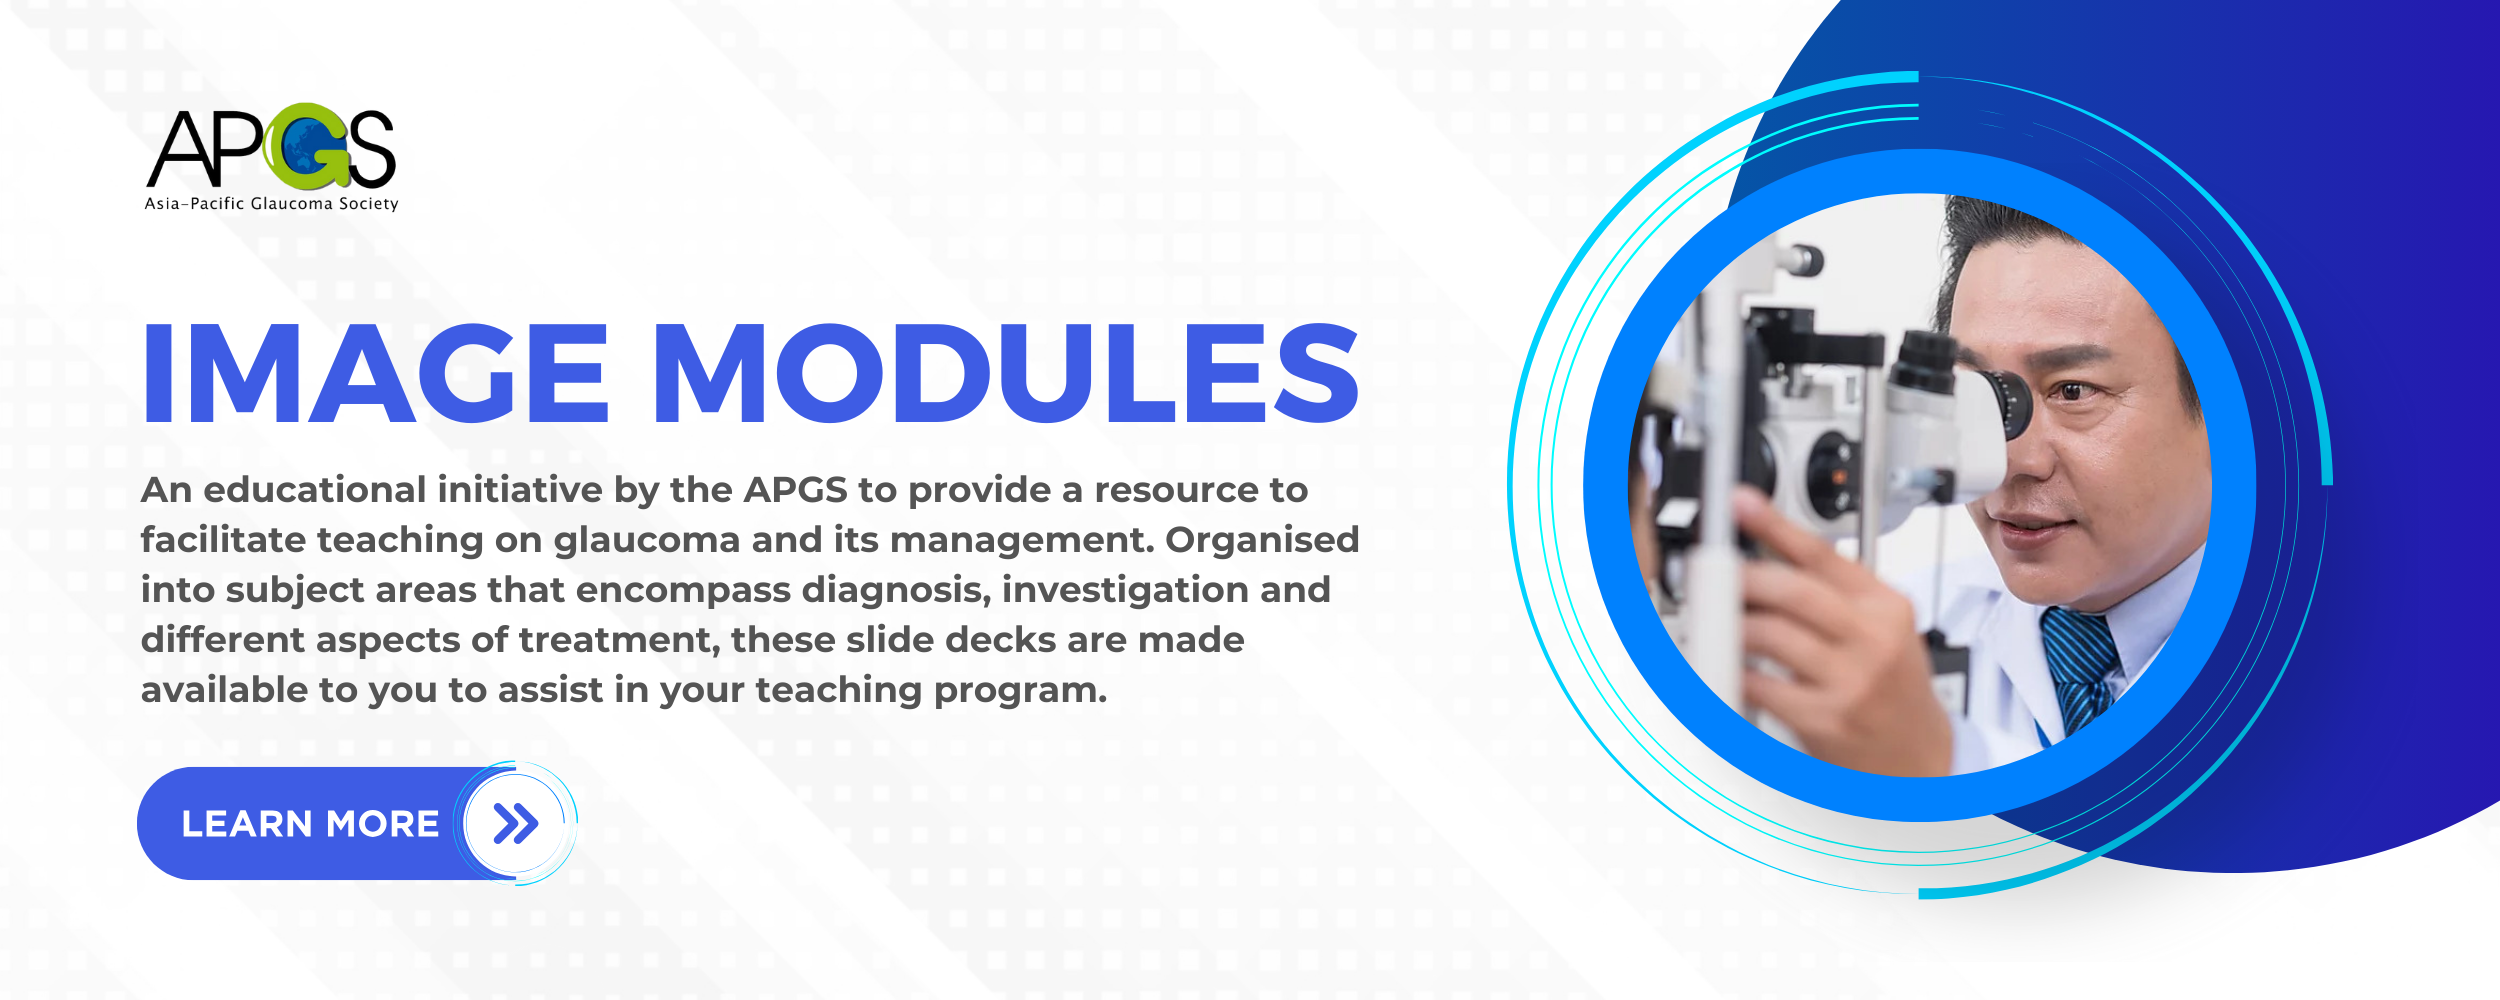 APGS IMAGE modules banner